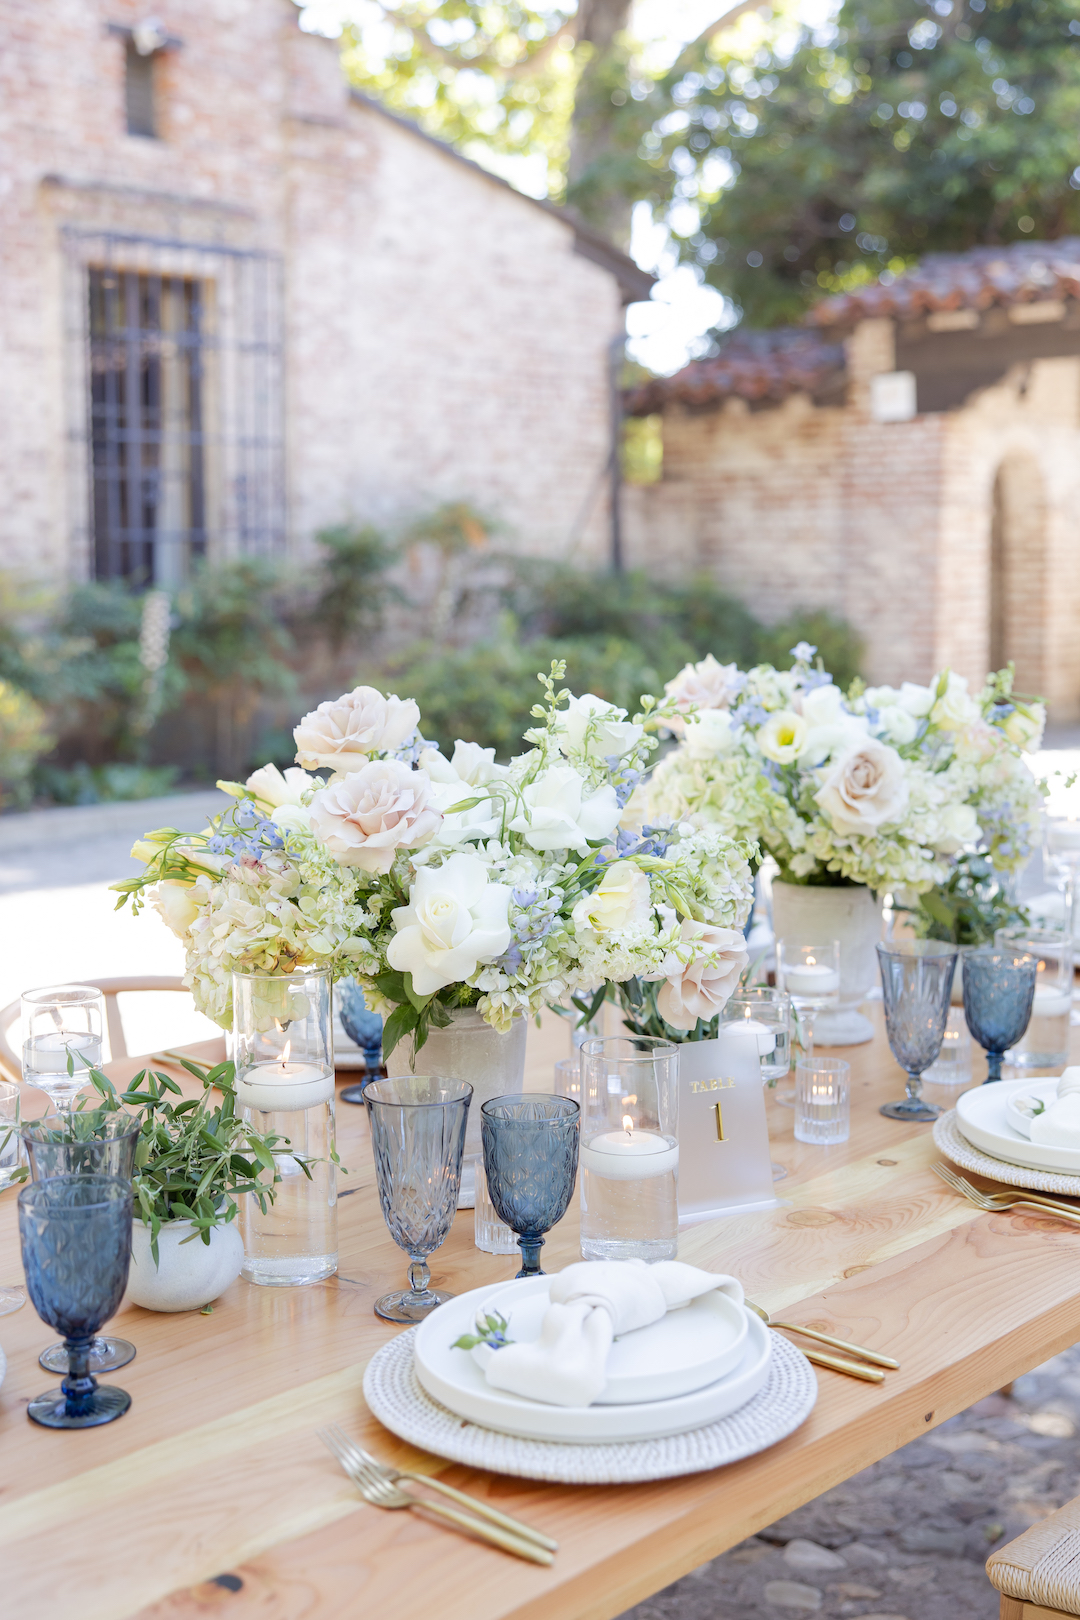 Elegant wedding table decor with glass candles, blue glassware, floral arrangements, ceramic plates, and gold-finished silverware. 